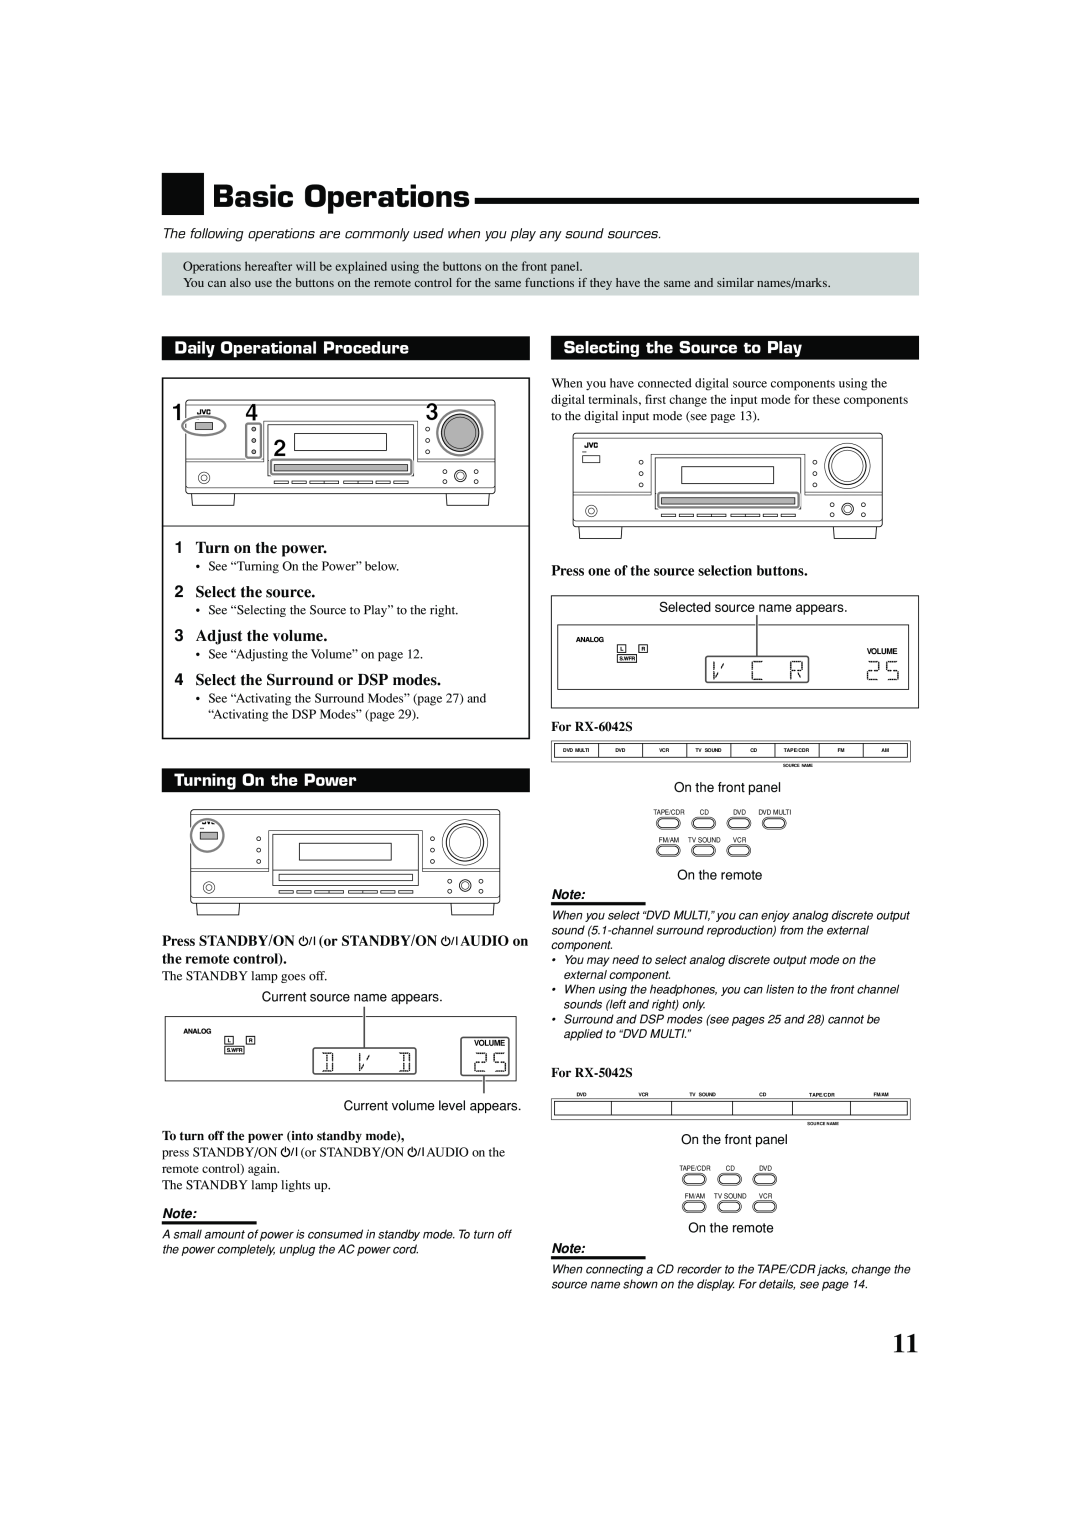 JVC LVT1140-007A manual Basic Operations, Daily Operational Procedure, Selecting the Source to Play, 1Turn on the power 